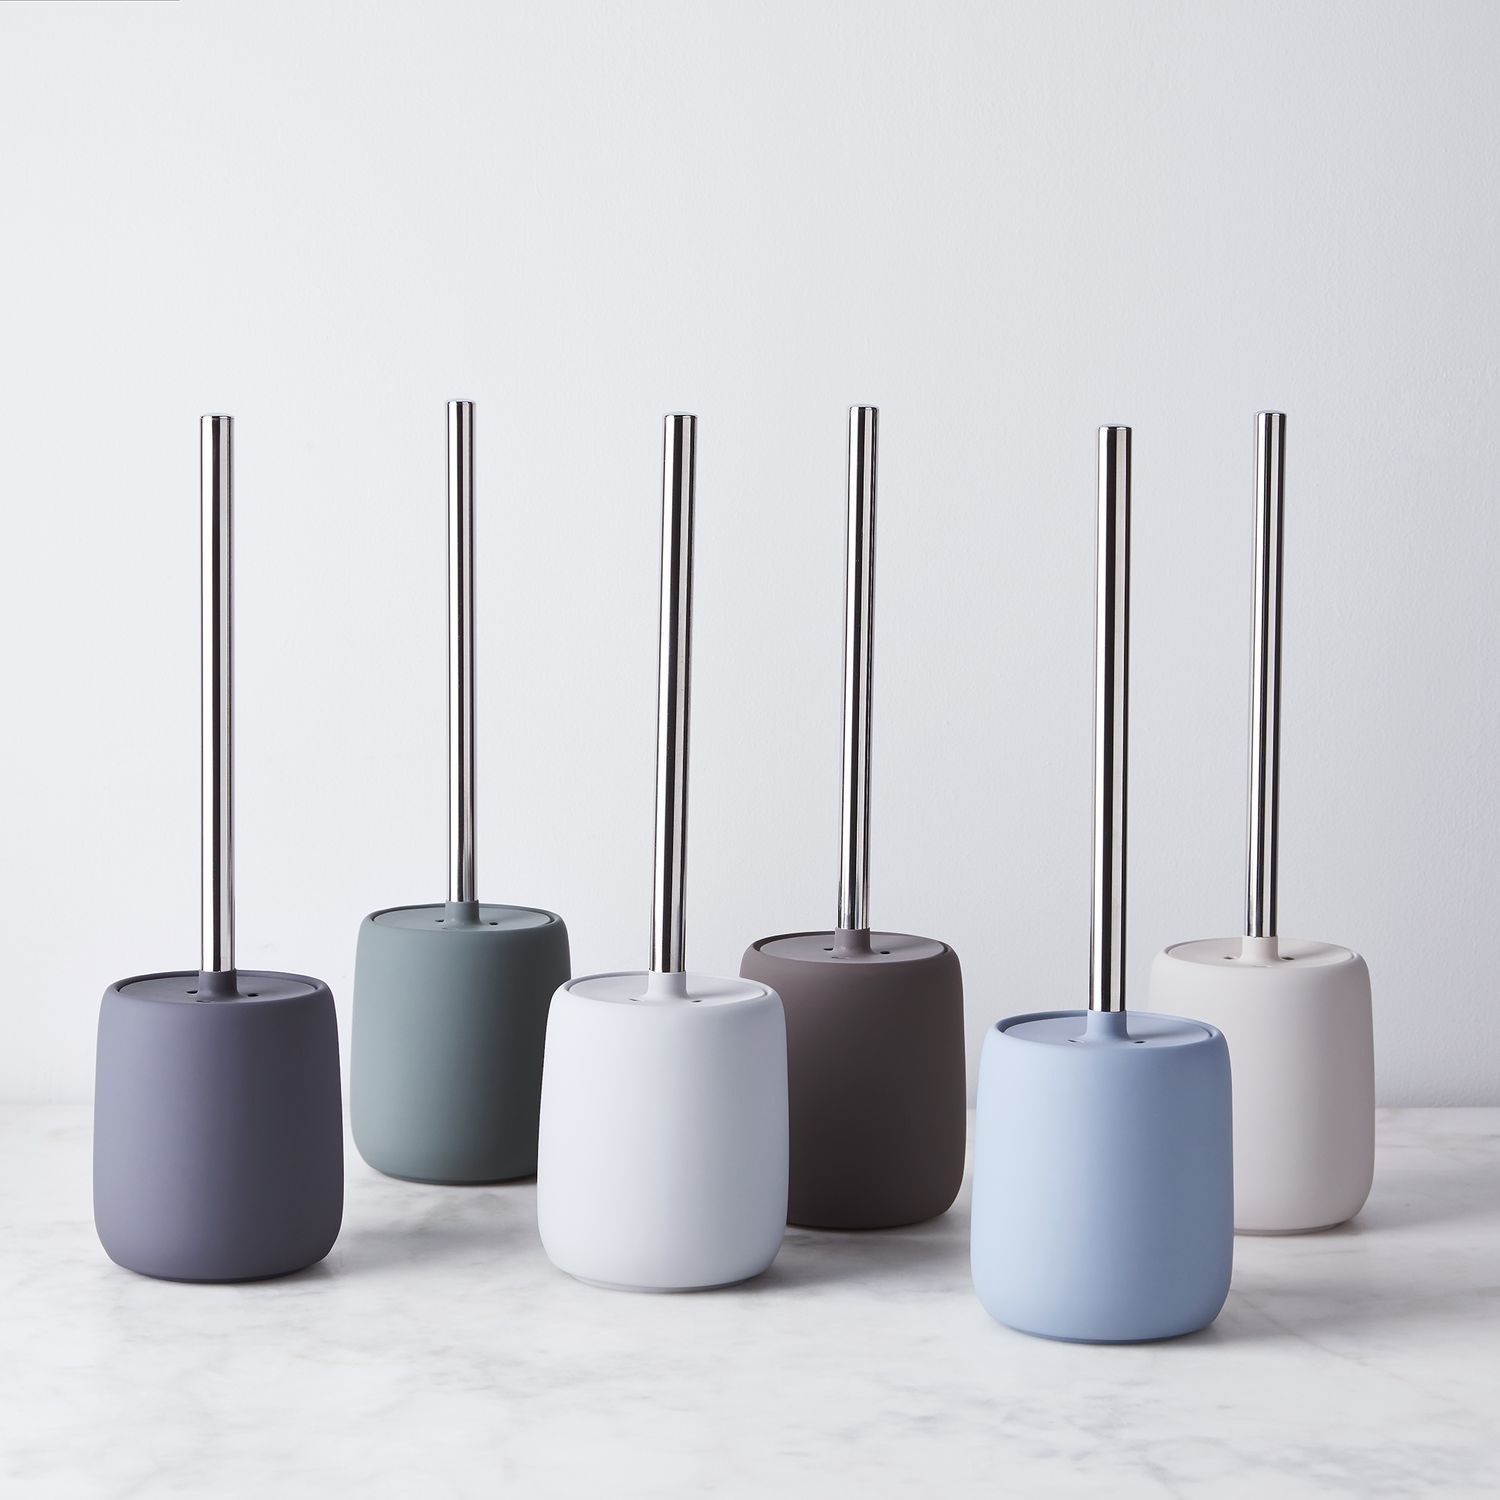 The toilet brush in six different colors